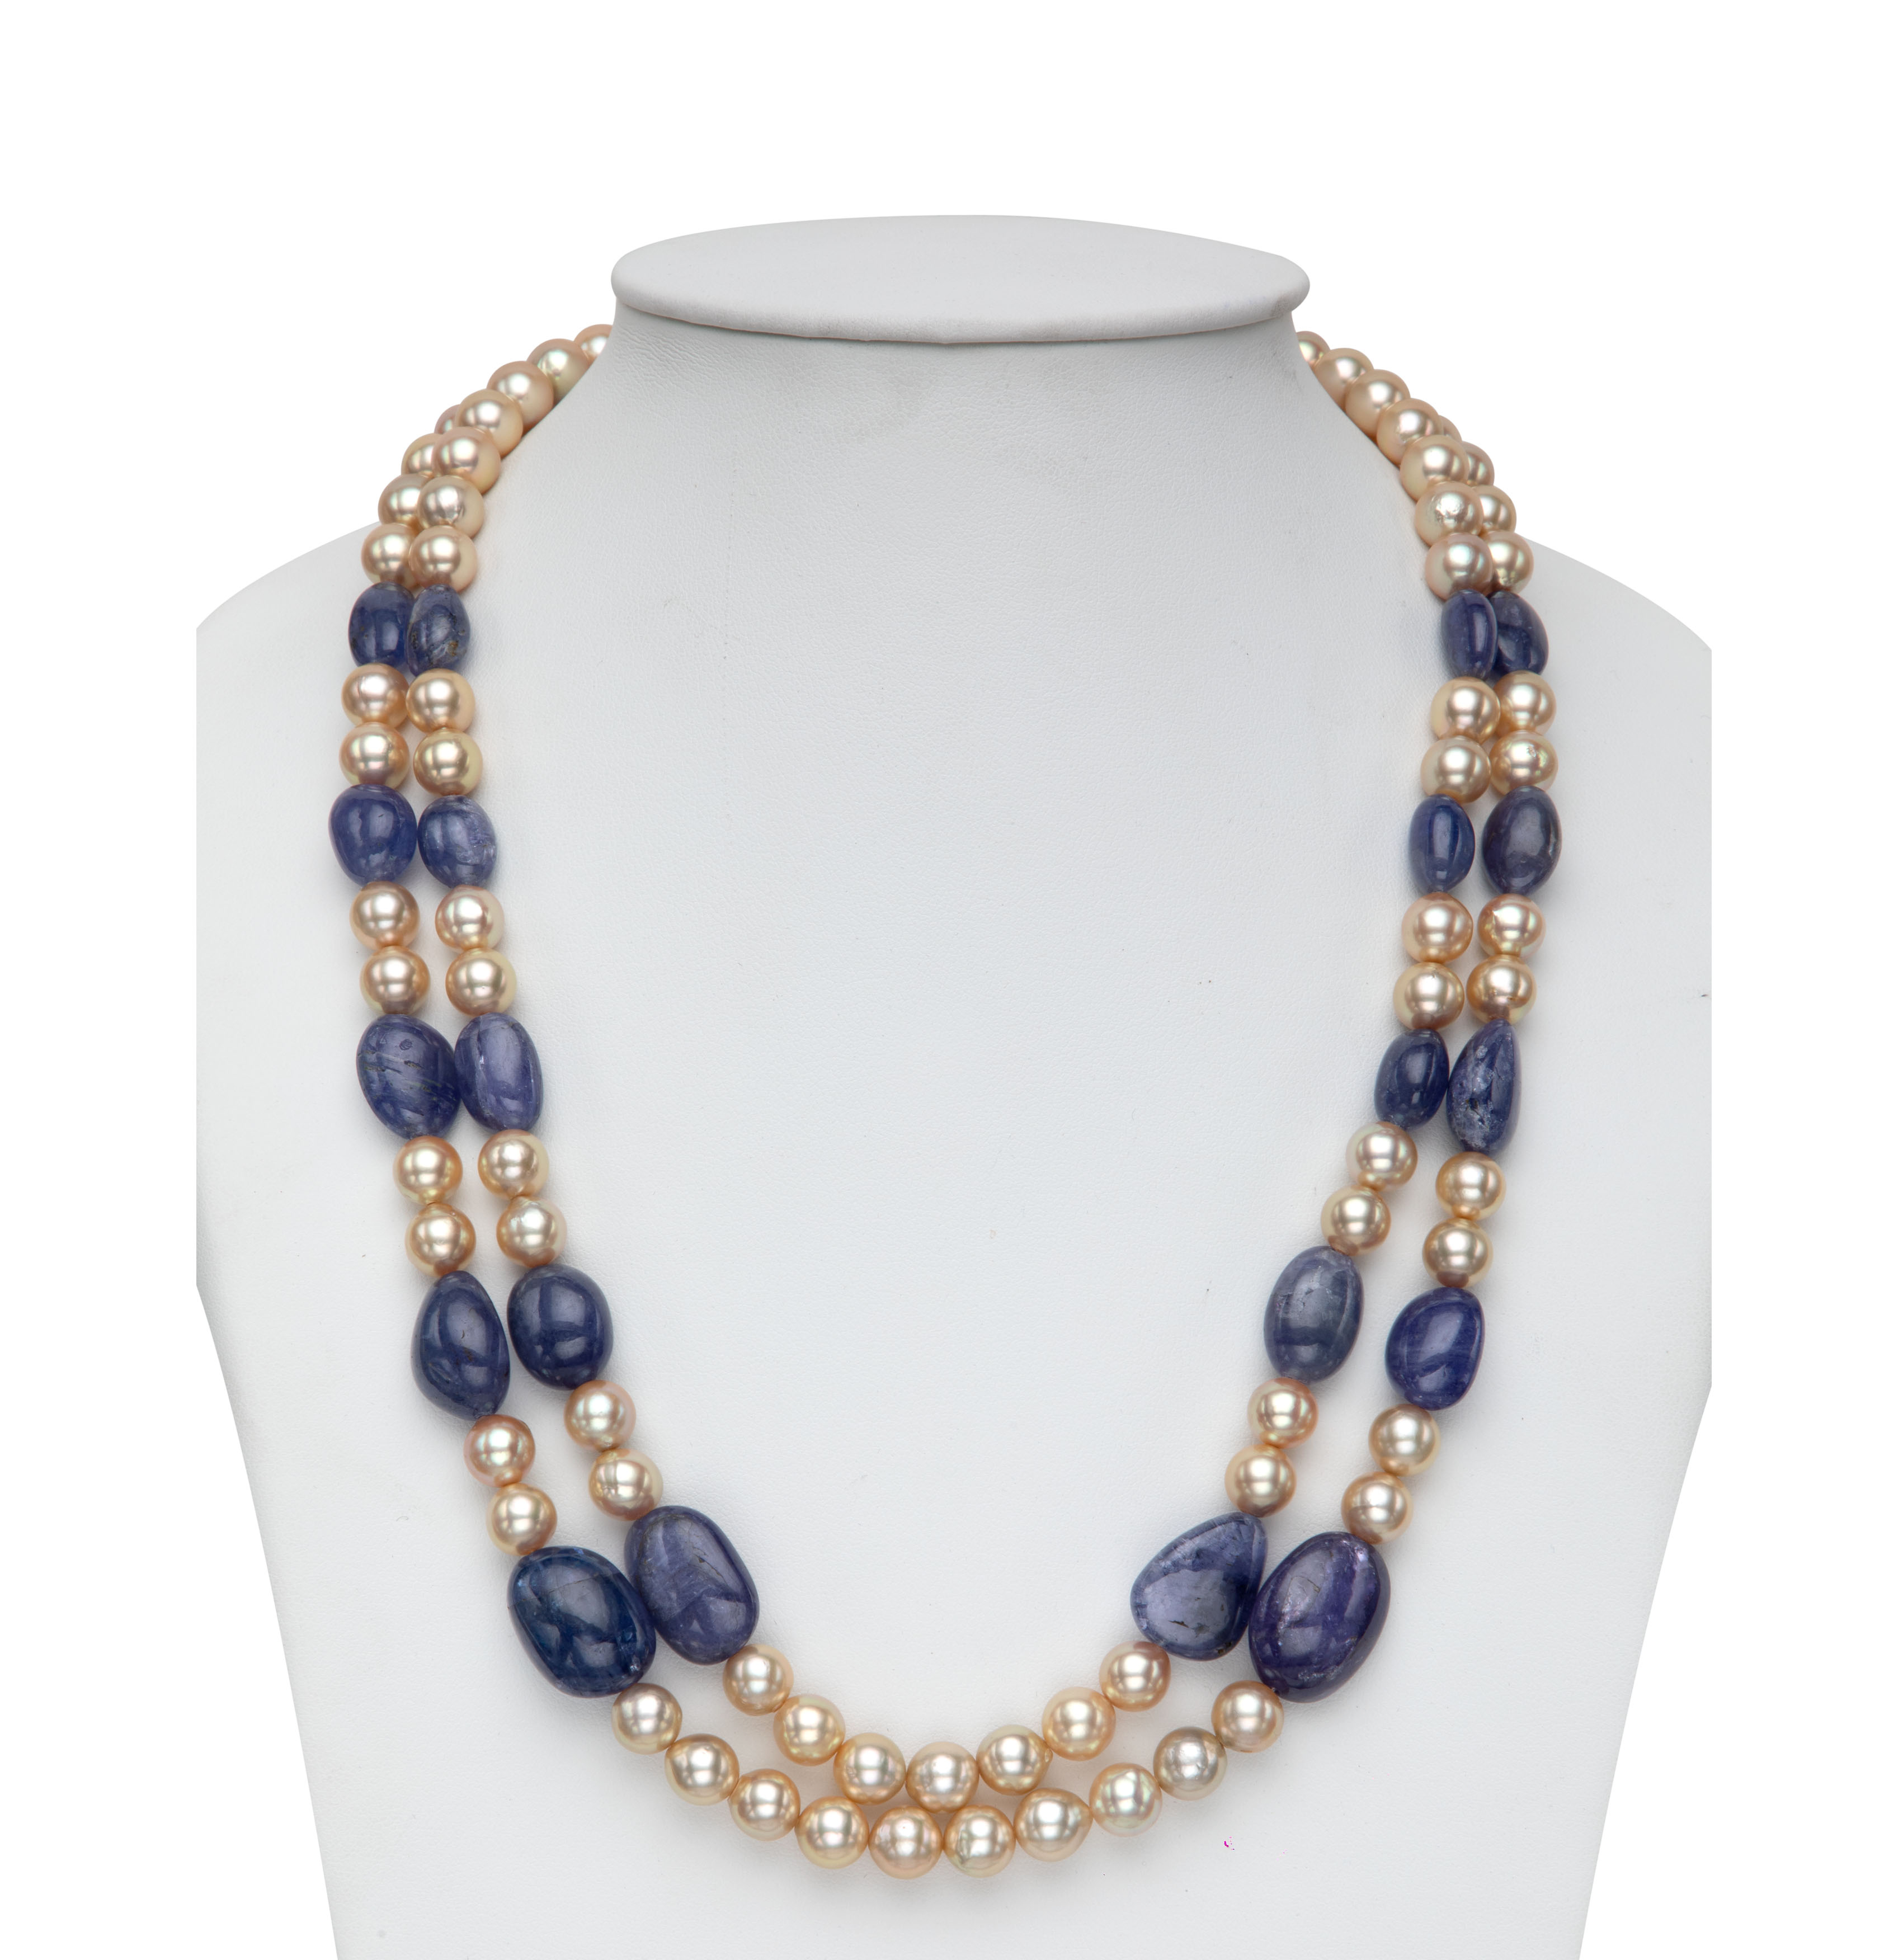 Real Tanzanite Beads and Golden Saltwater Akoya Pearls Necklace Set ...